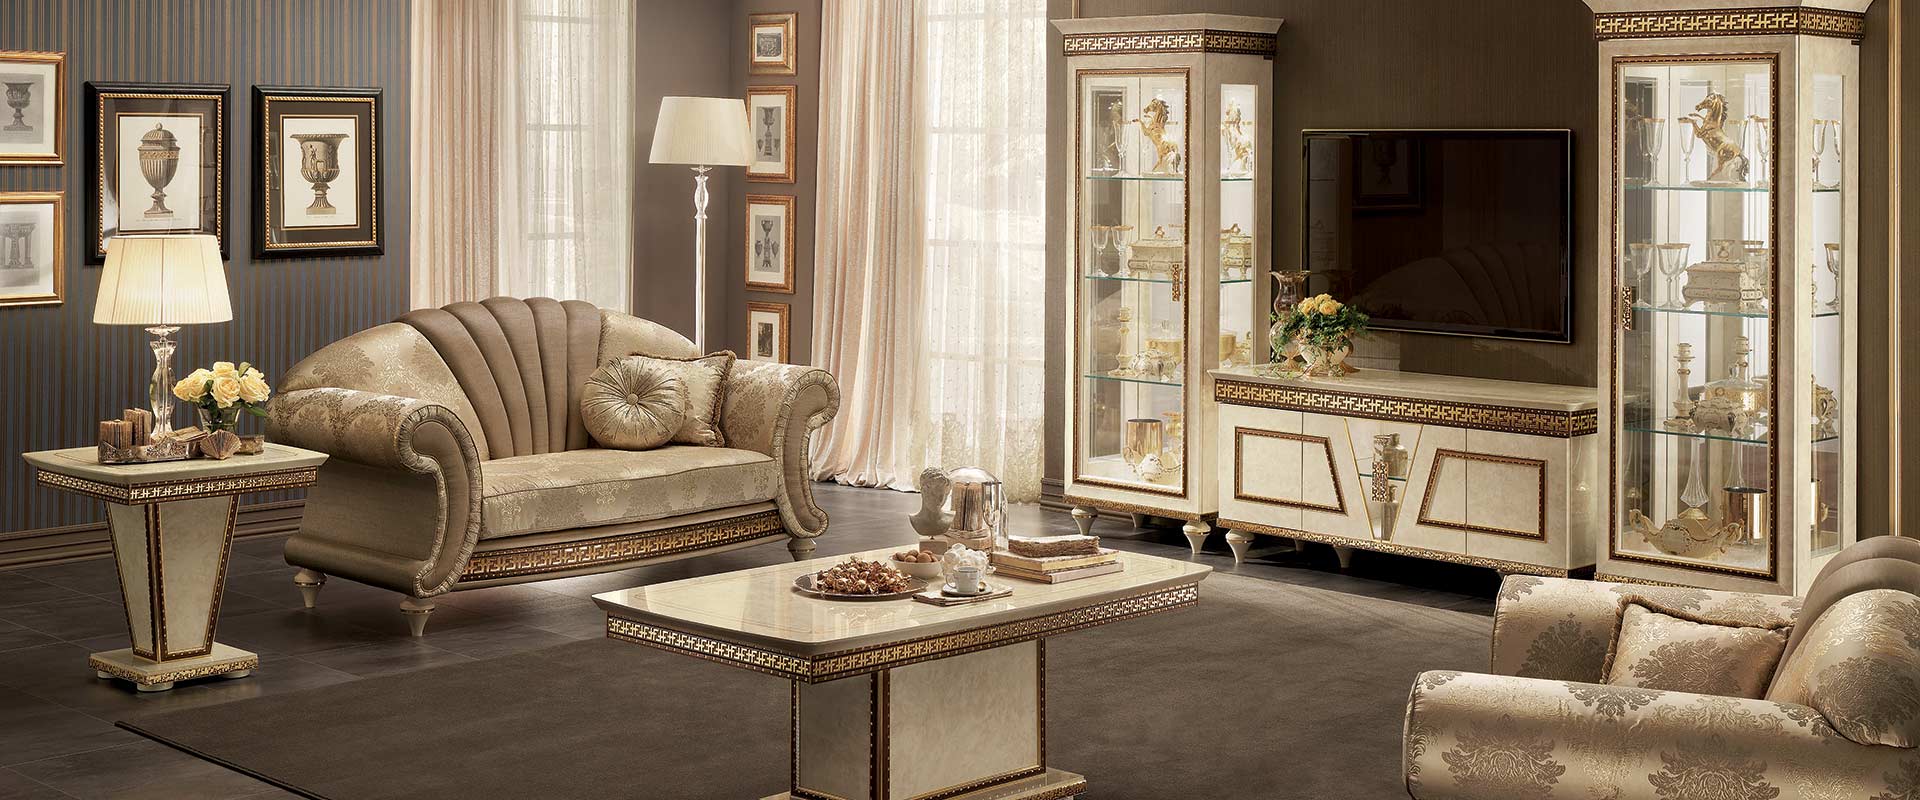 Arredoclassic Italian Classic Furniture For Your Home - Living Room New Classic Furniture - HD Wallpaper 